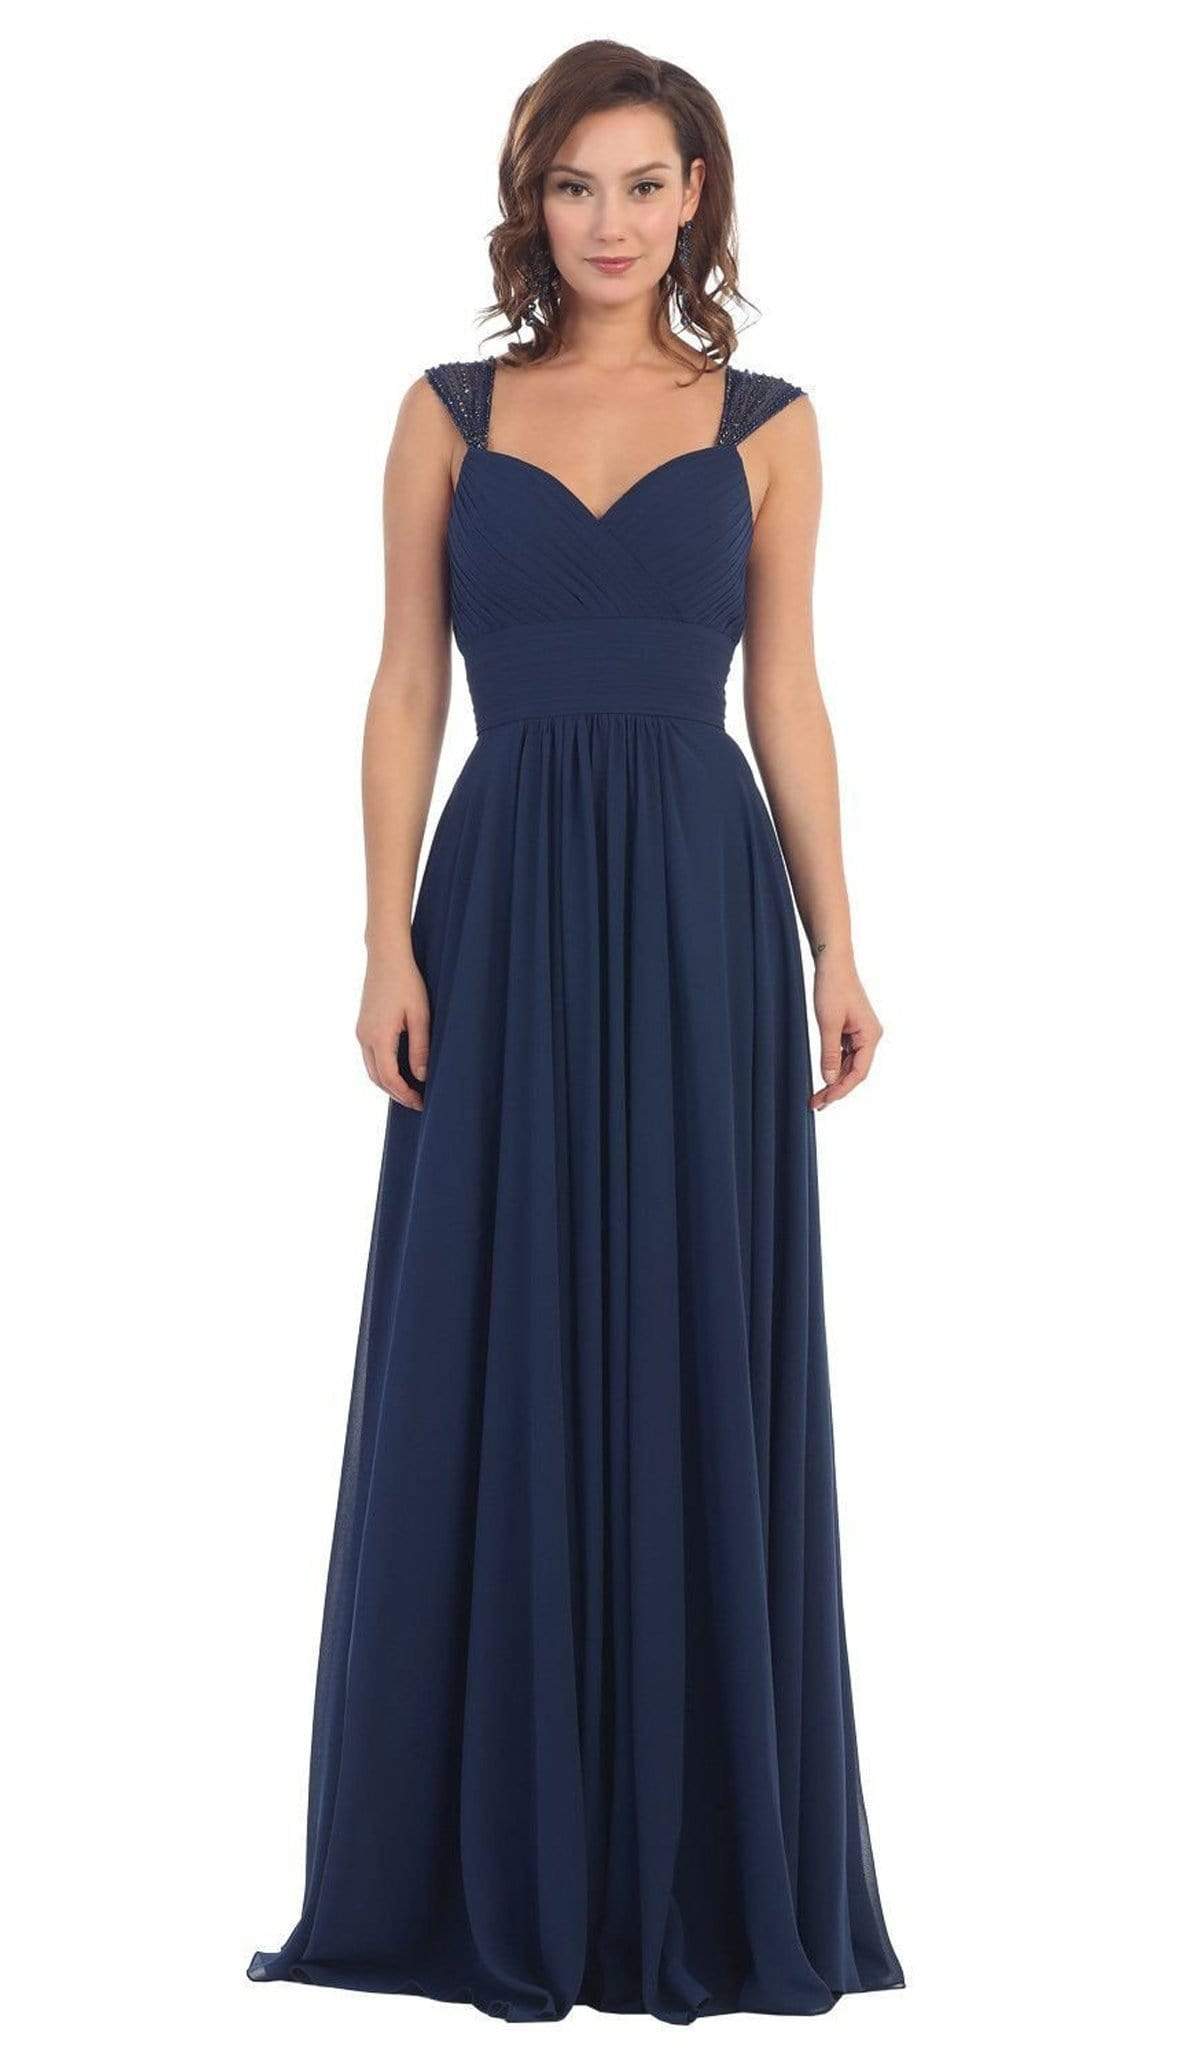 May Queen - MQ1275B Pleated Sweetheart A-line Evening Dress Bridesmaid Dresses 22 / Royal-Blue